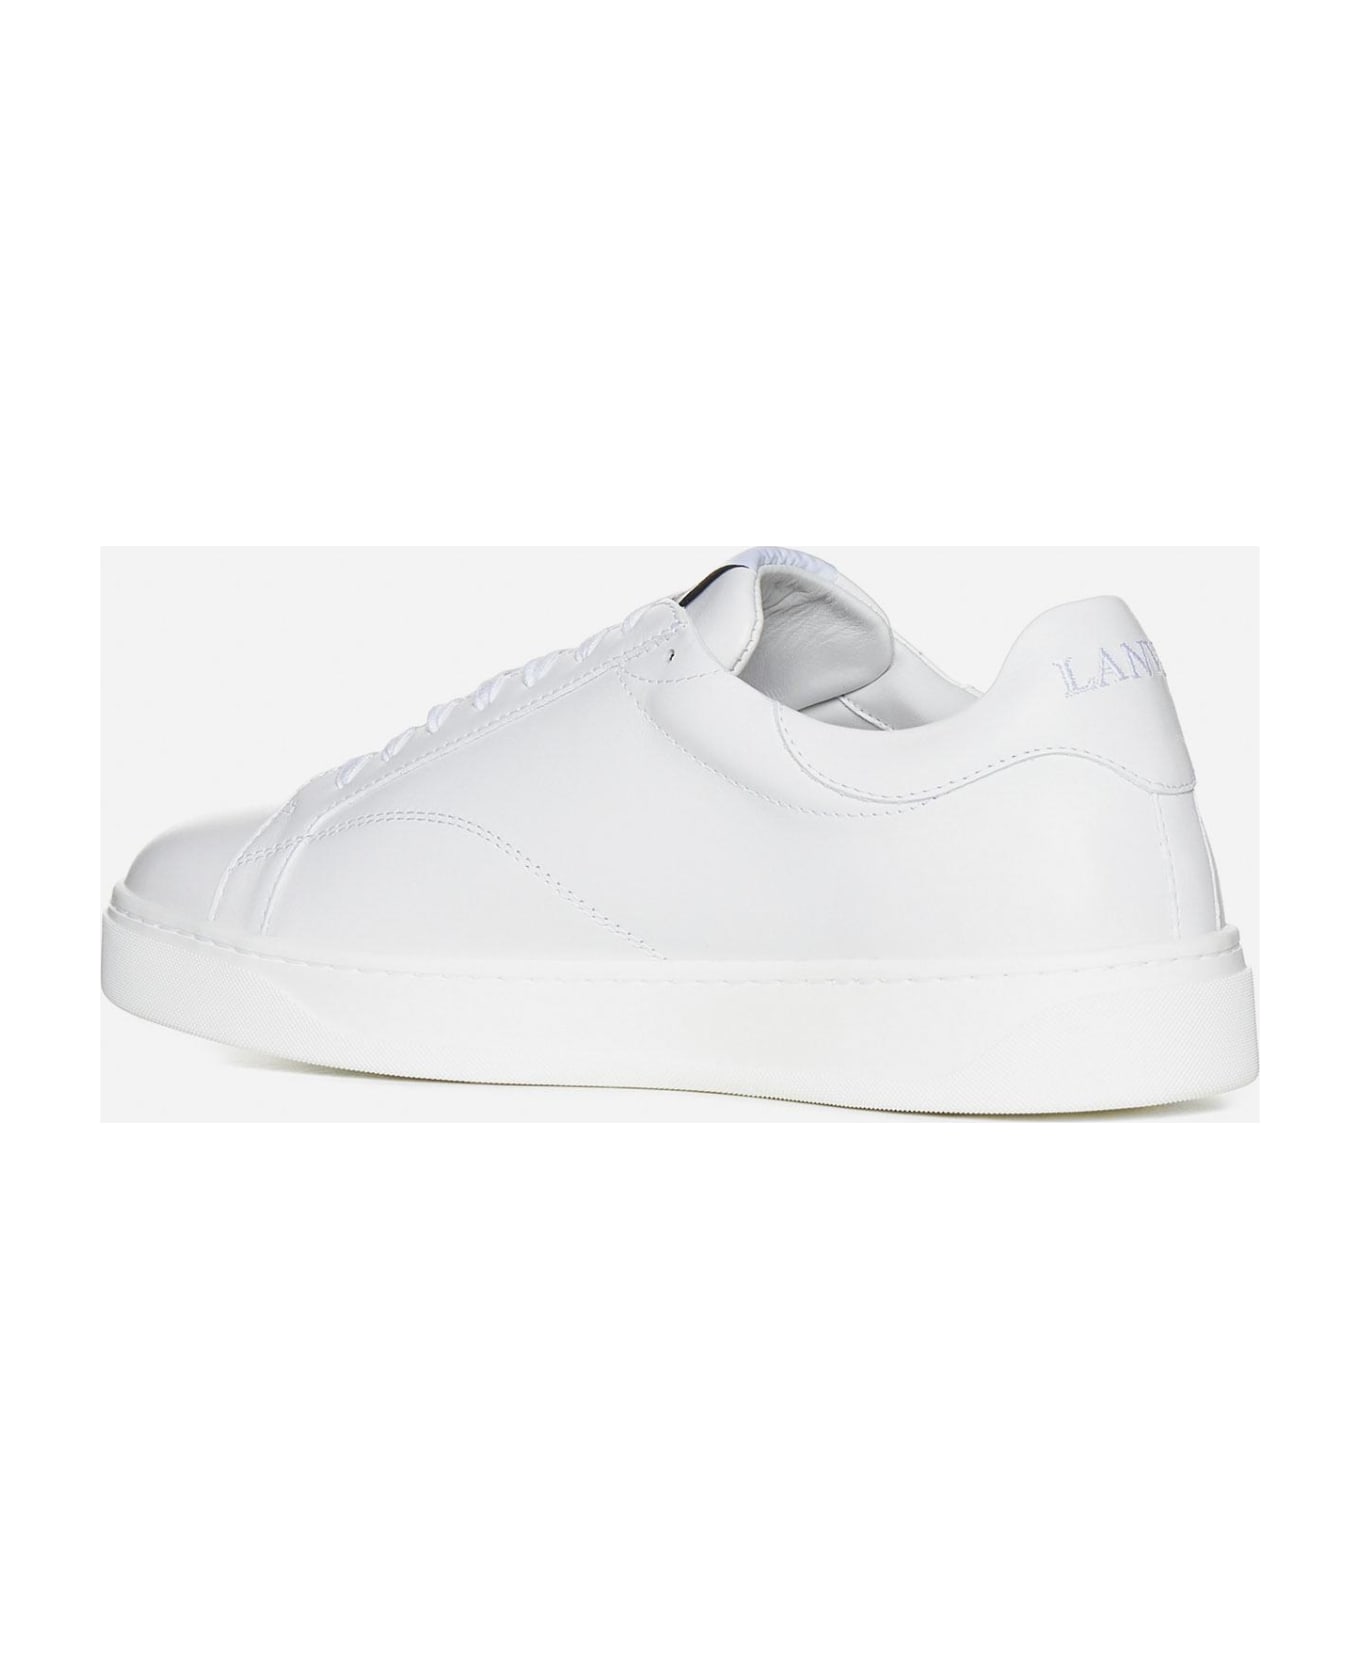 Lanvin Ddb0 Leather Sneakers - White/white スニーカー